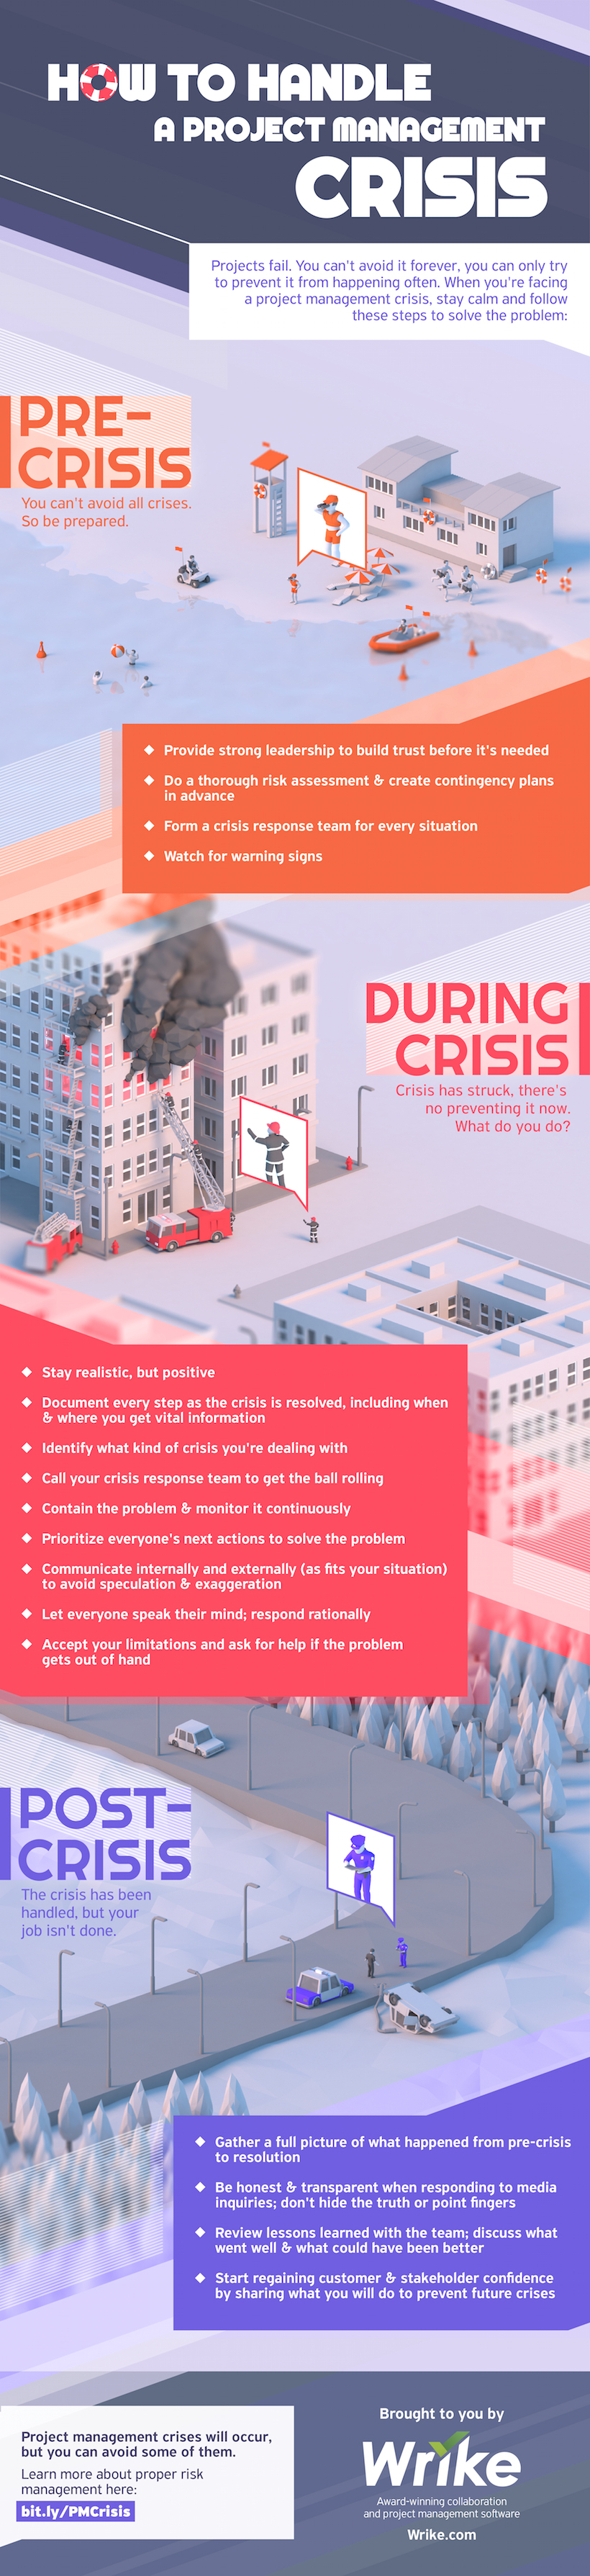 How to Handle a Project Management Crisis (#Infographic)